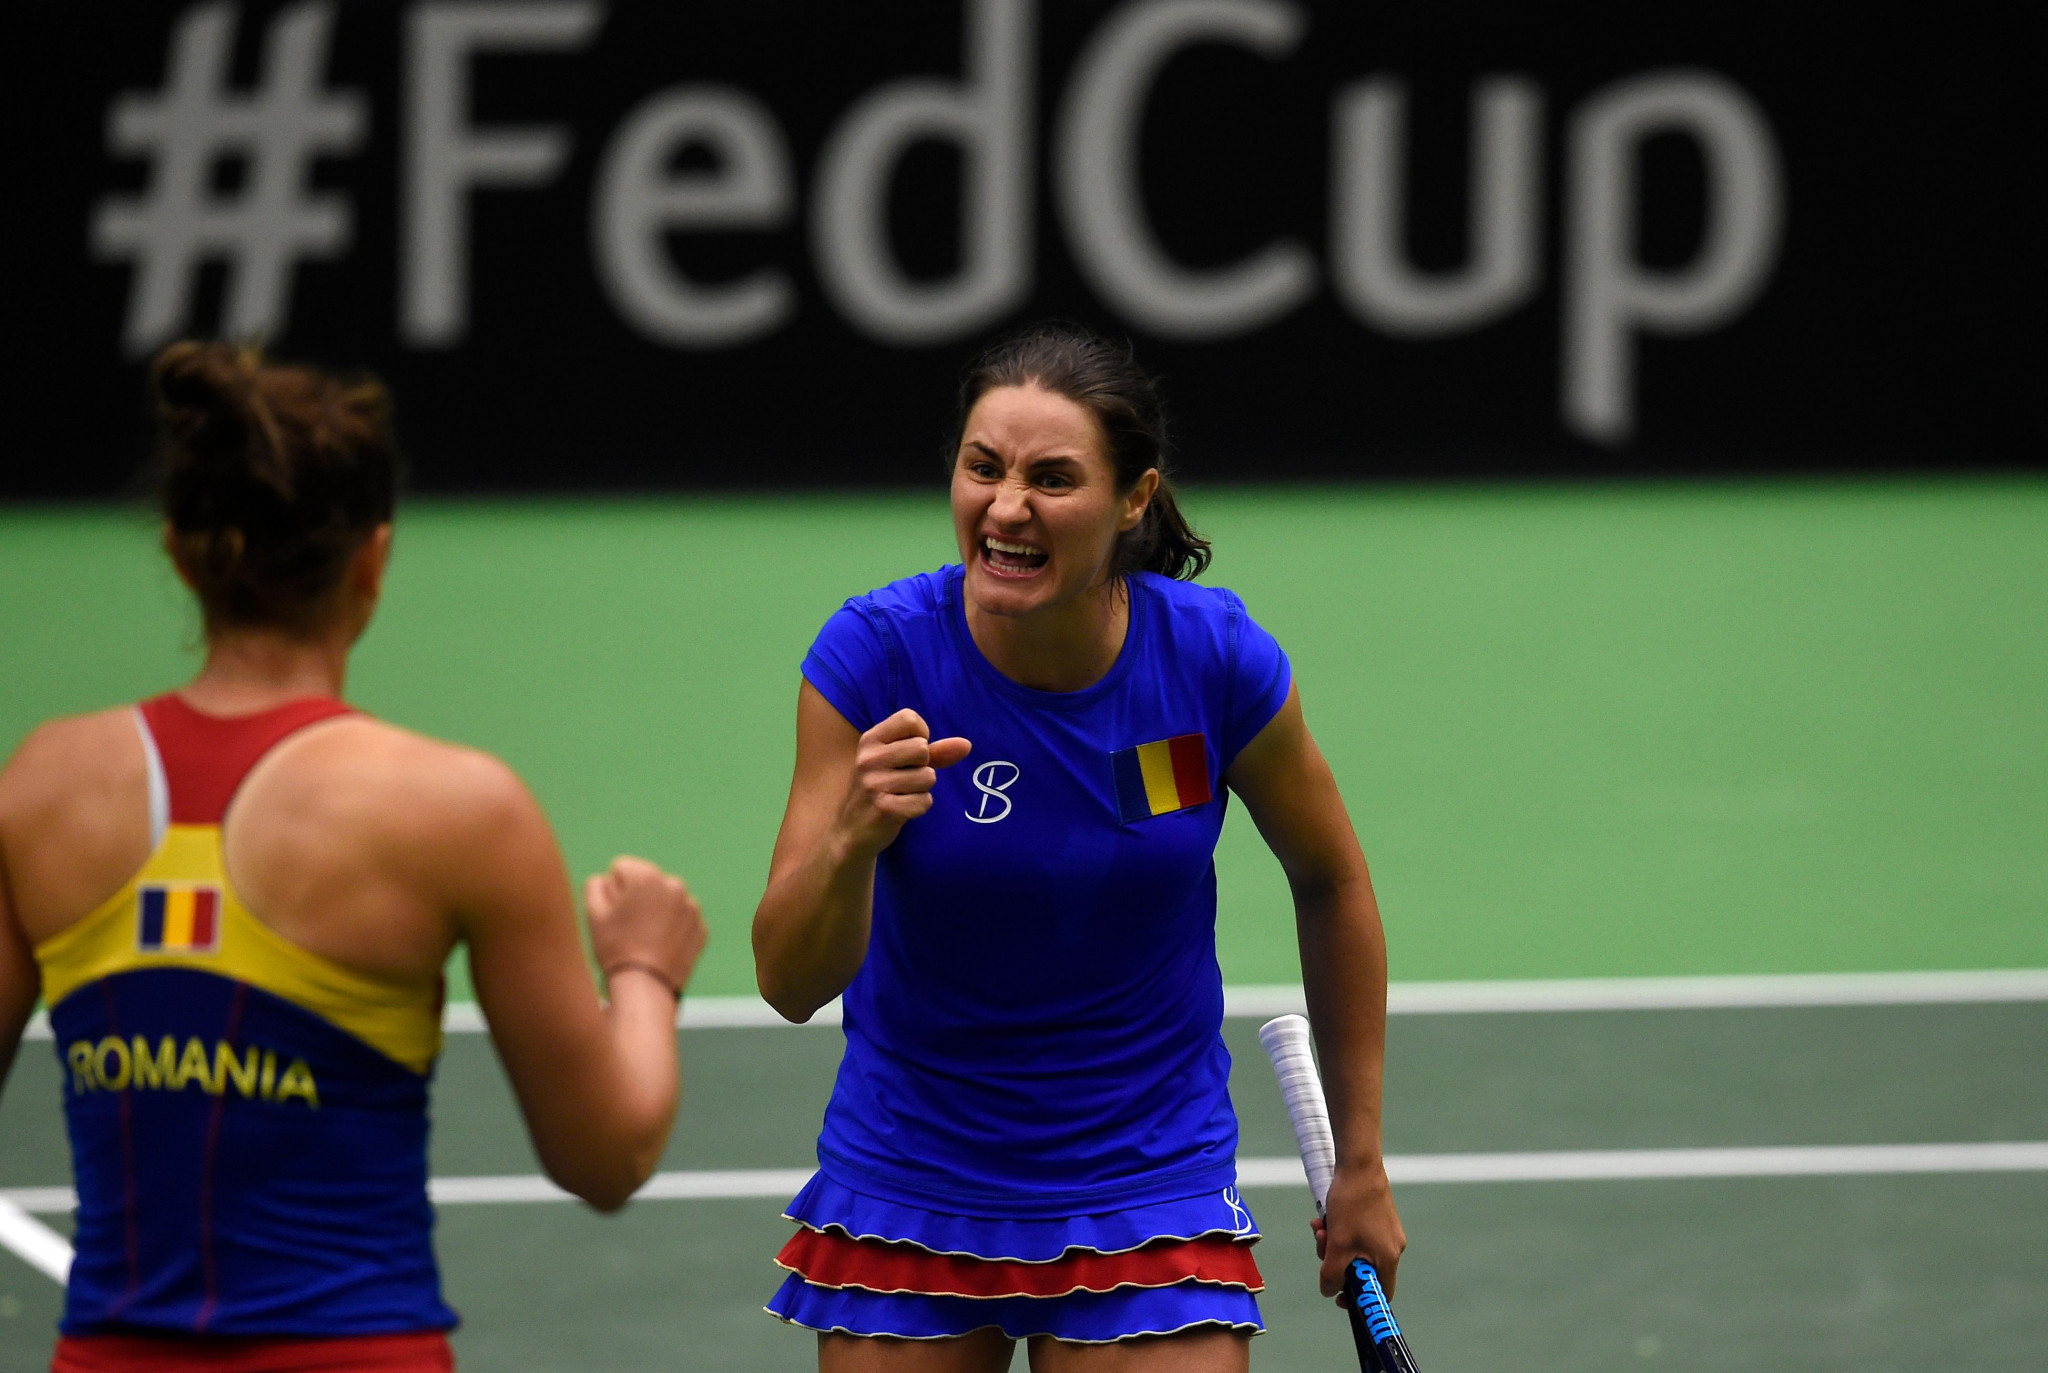 Romania stunned defending champions the Czech Republic to reach their first Fed Cup semi-final as Irina Camelia Begu and Monica Niculescu won the doubles deciding rubber ©Getty Images